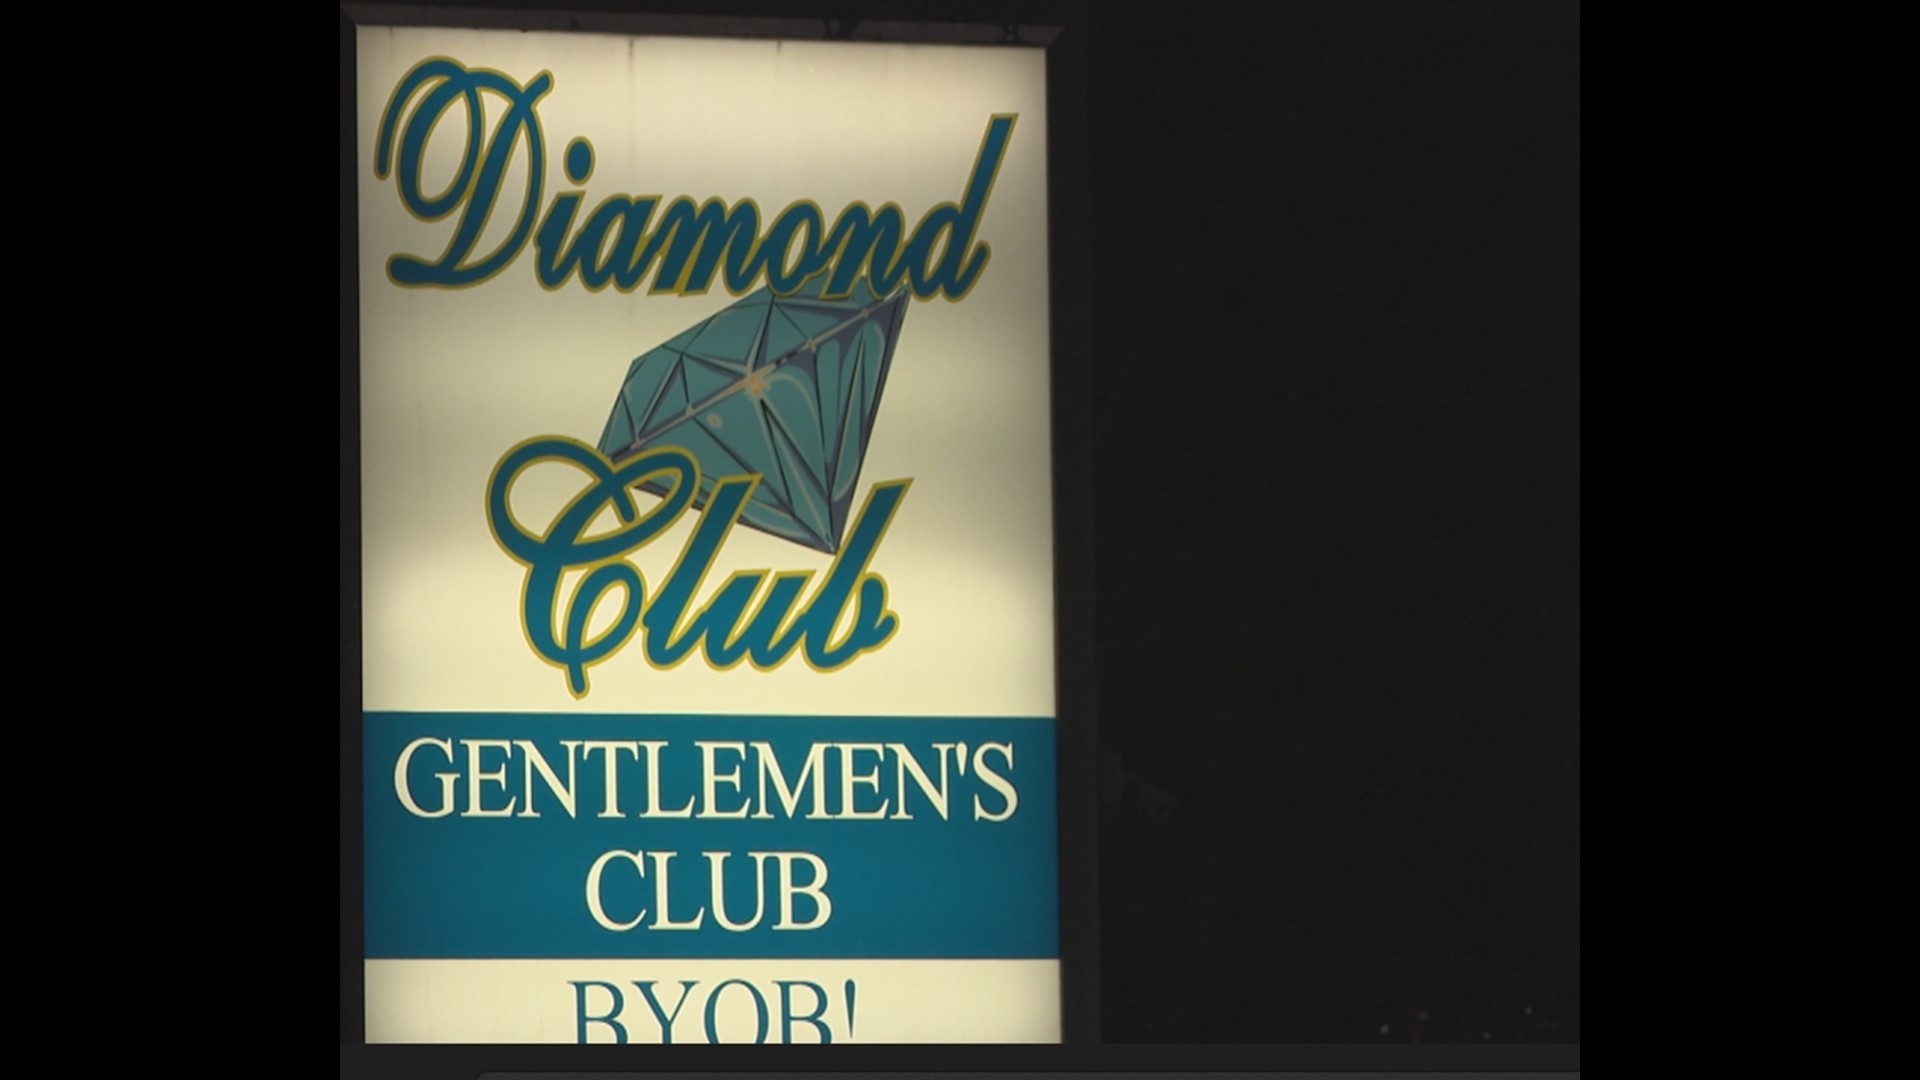 Strip Club Forced to Close After Staying Open, Local News Busted Them